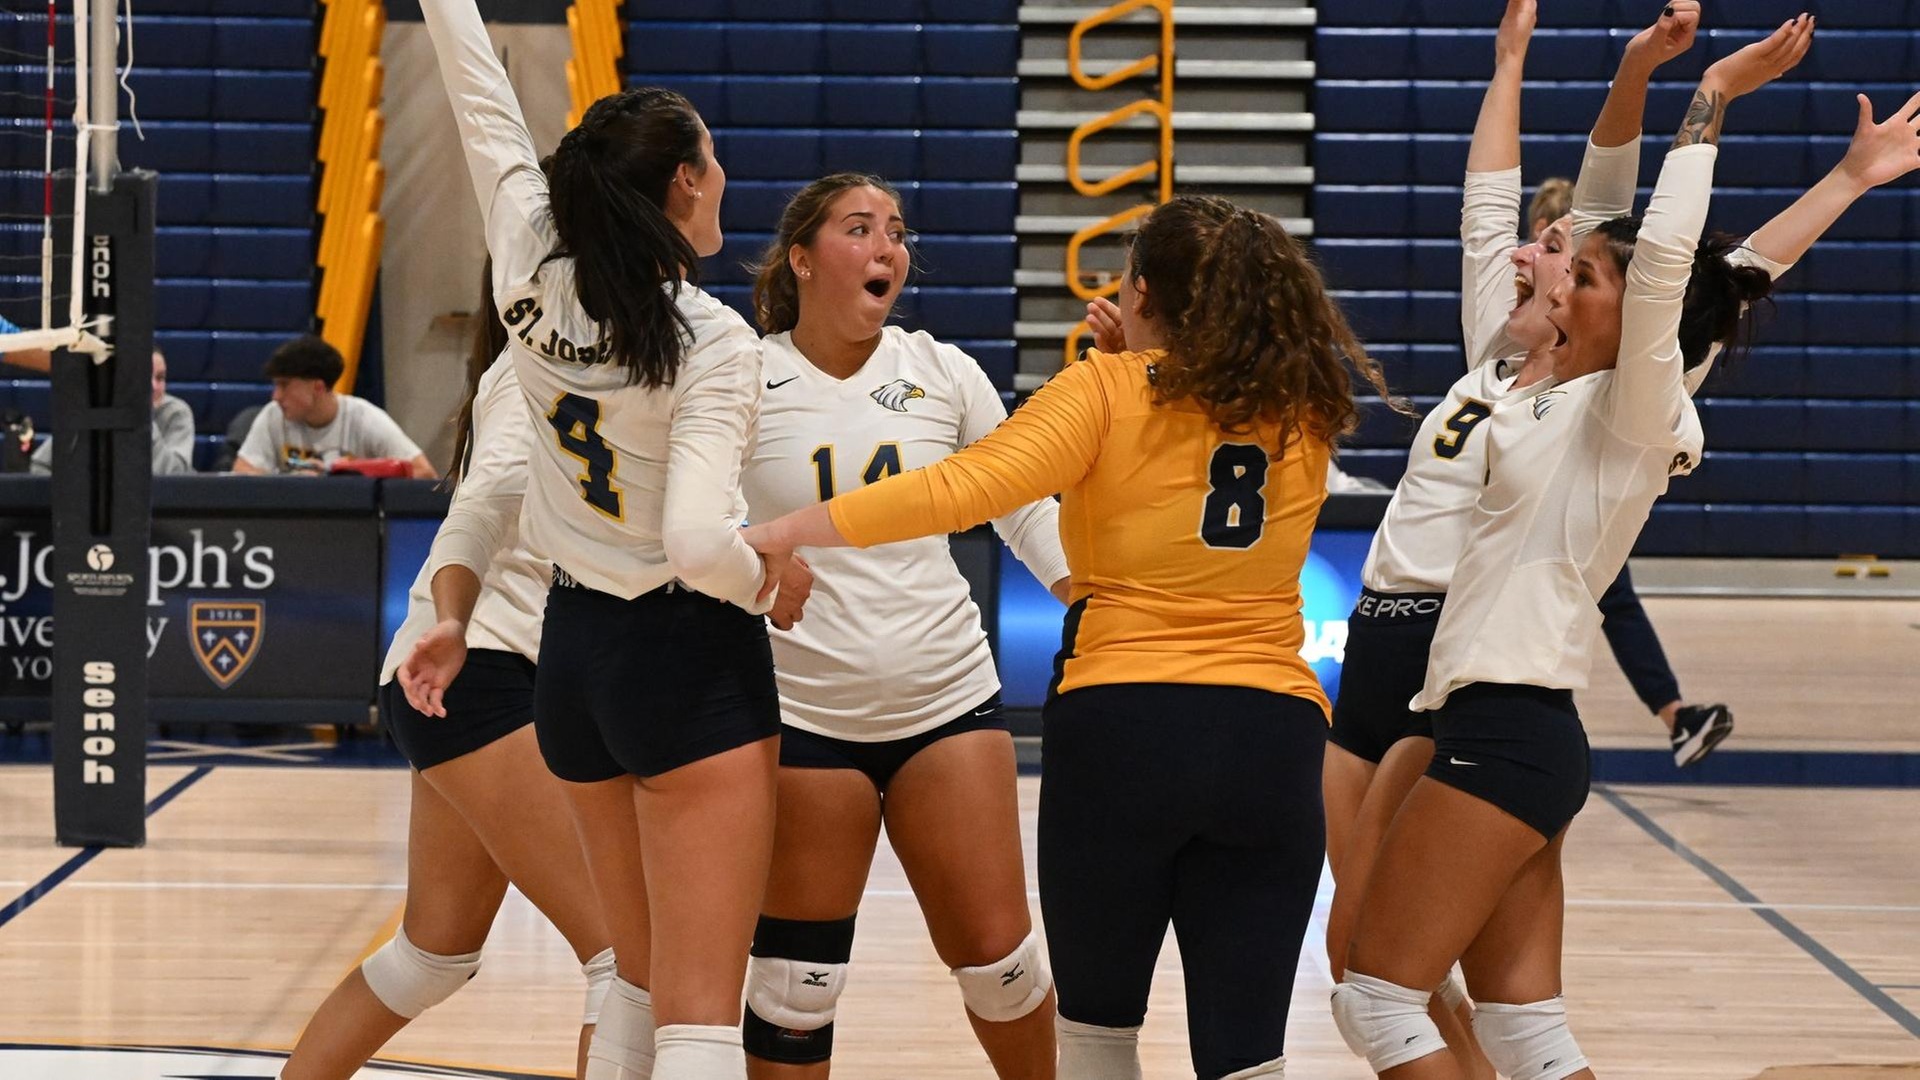 Women's Volleyball Takes Down SJBK, 3-0